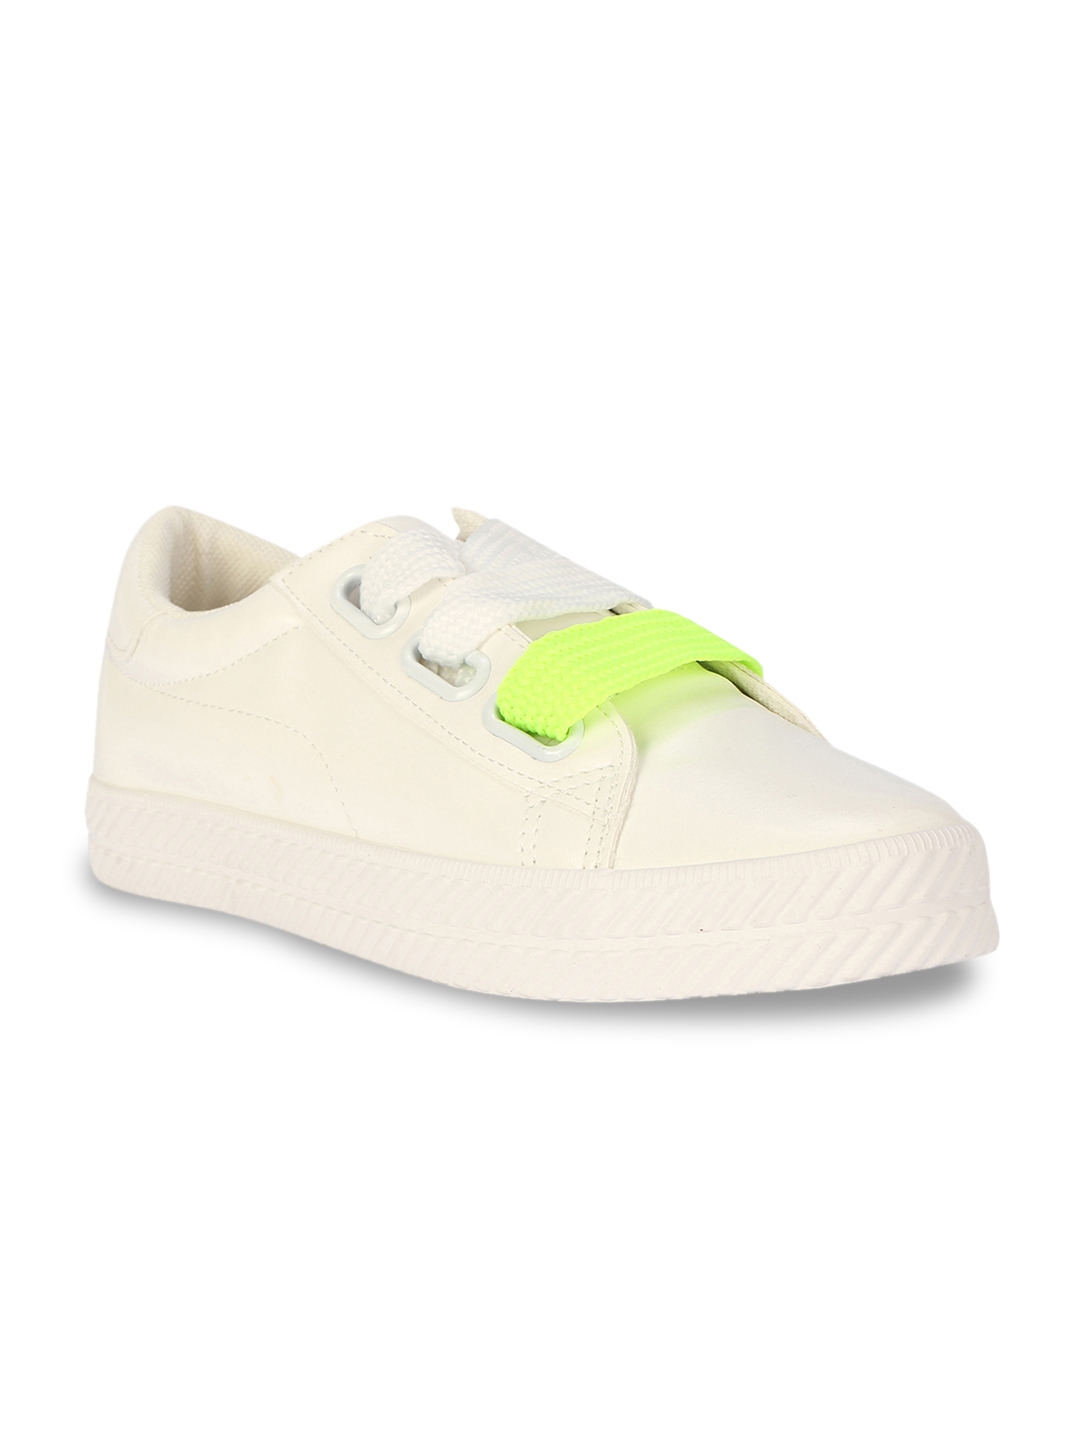 Buy People Women White Sneakers - Casual Shoes for Women 8214263 | Myntra